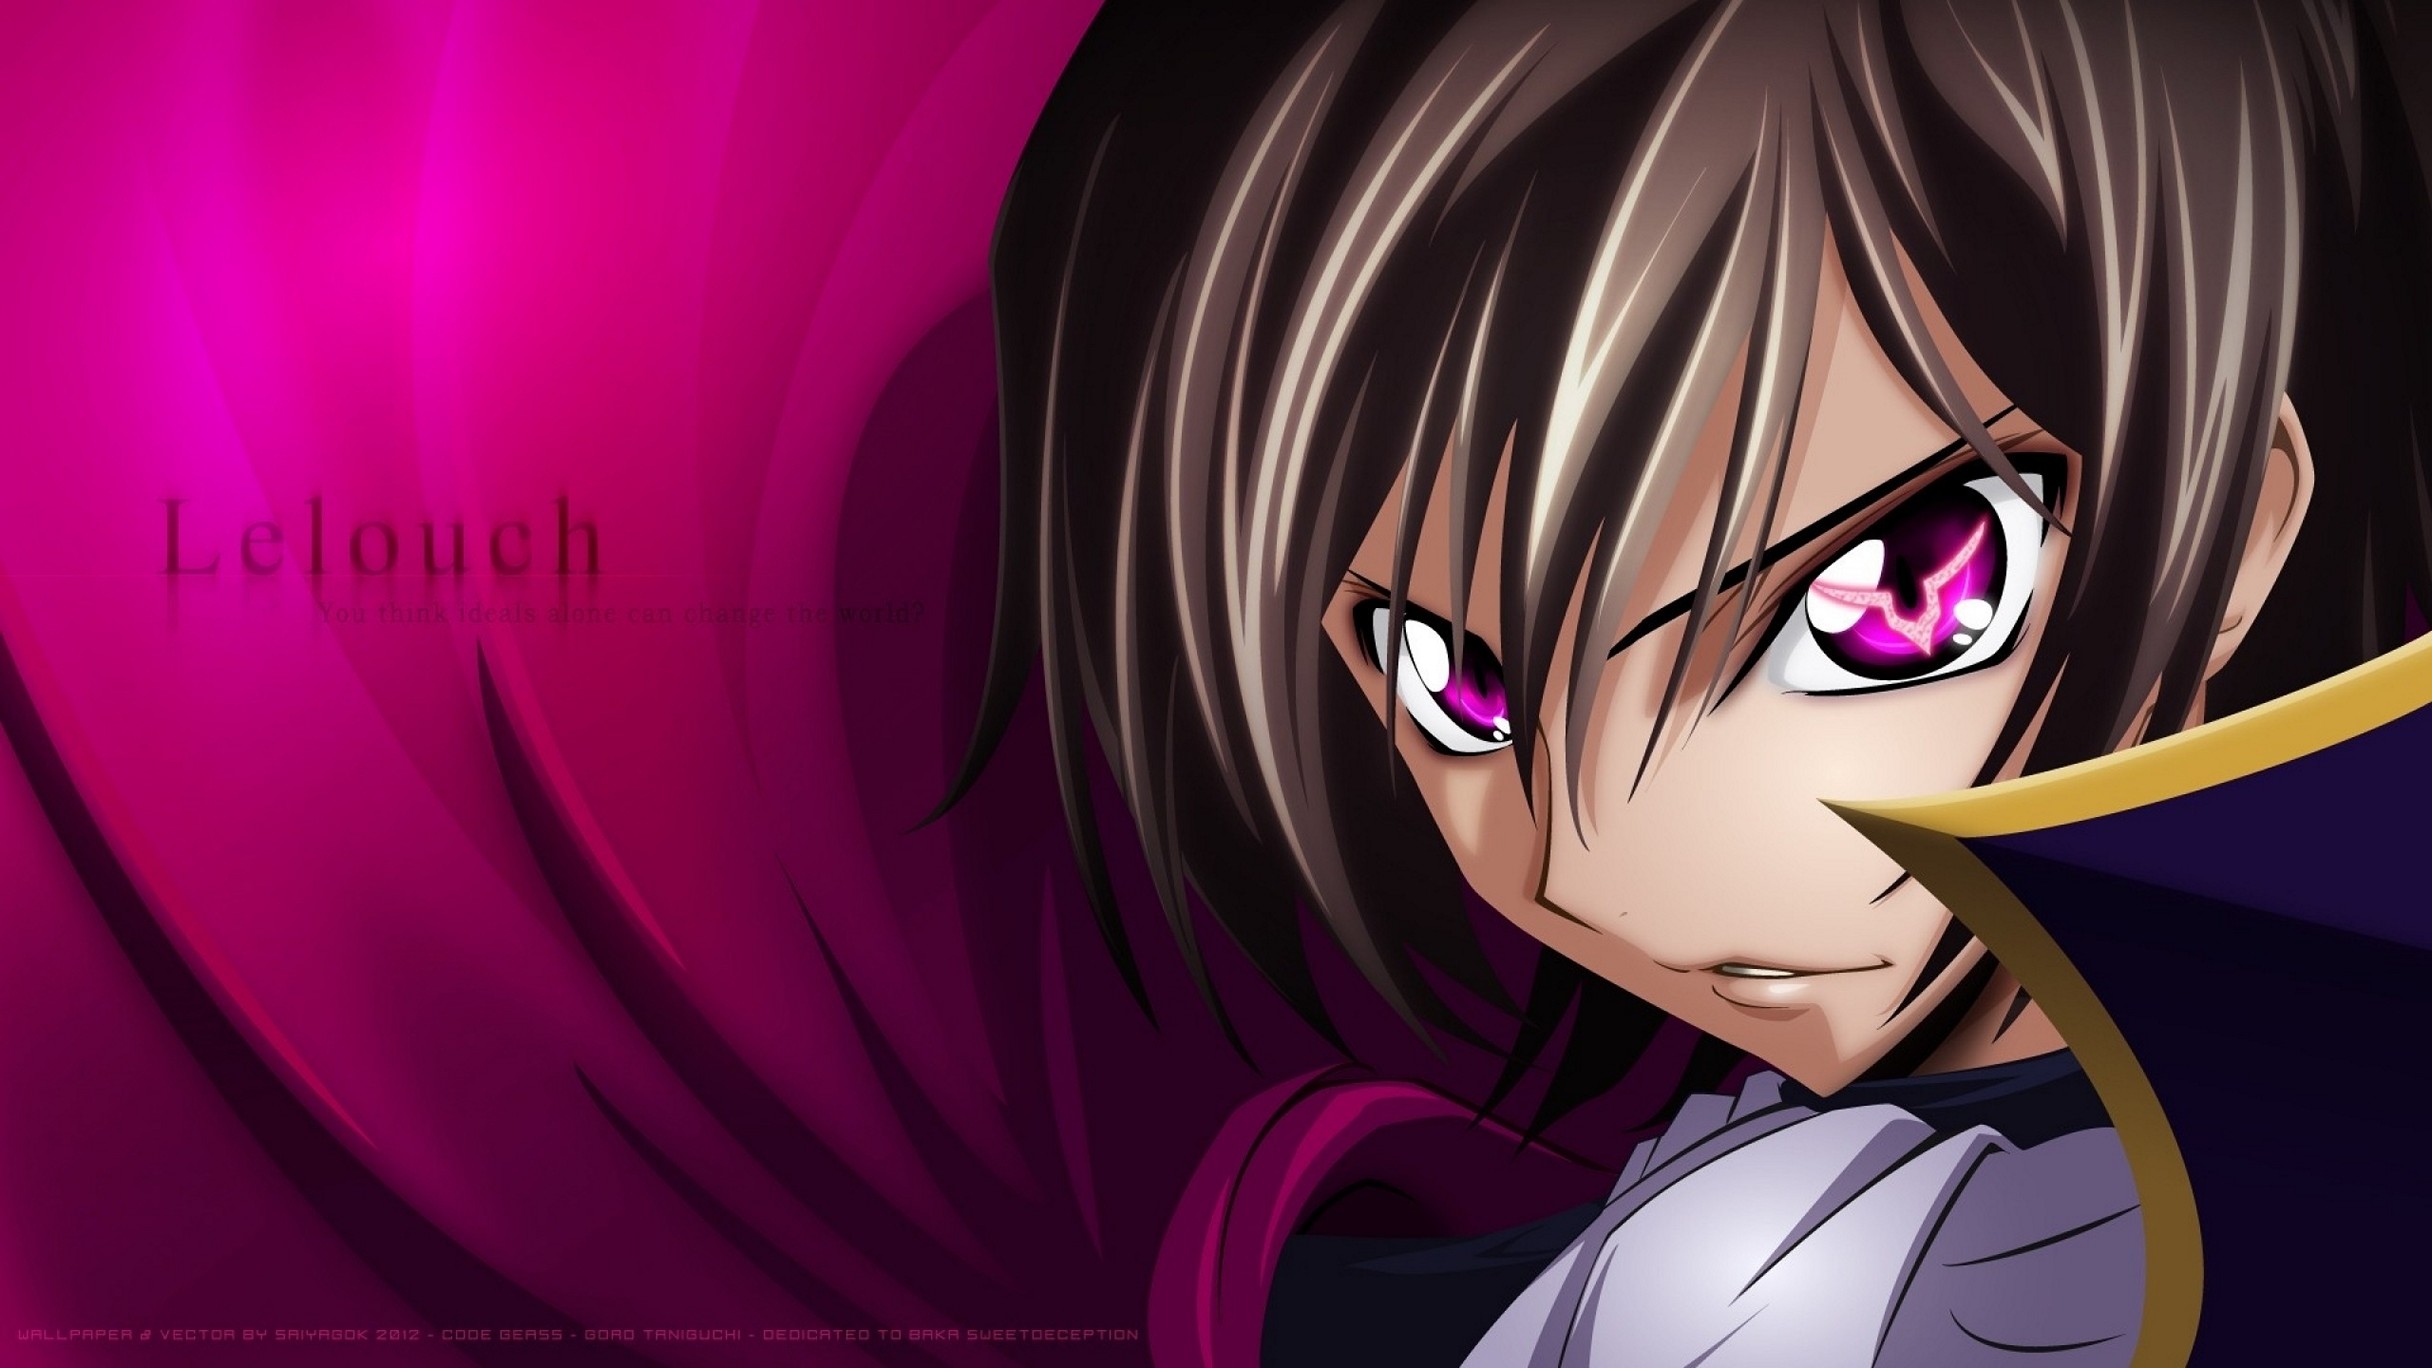 Code Geass Lelouch Lamperouge Face Anime Wallpaper 1080p Full Hd OmA810